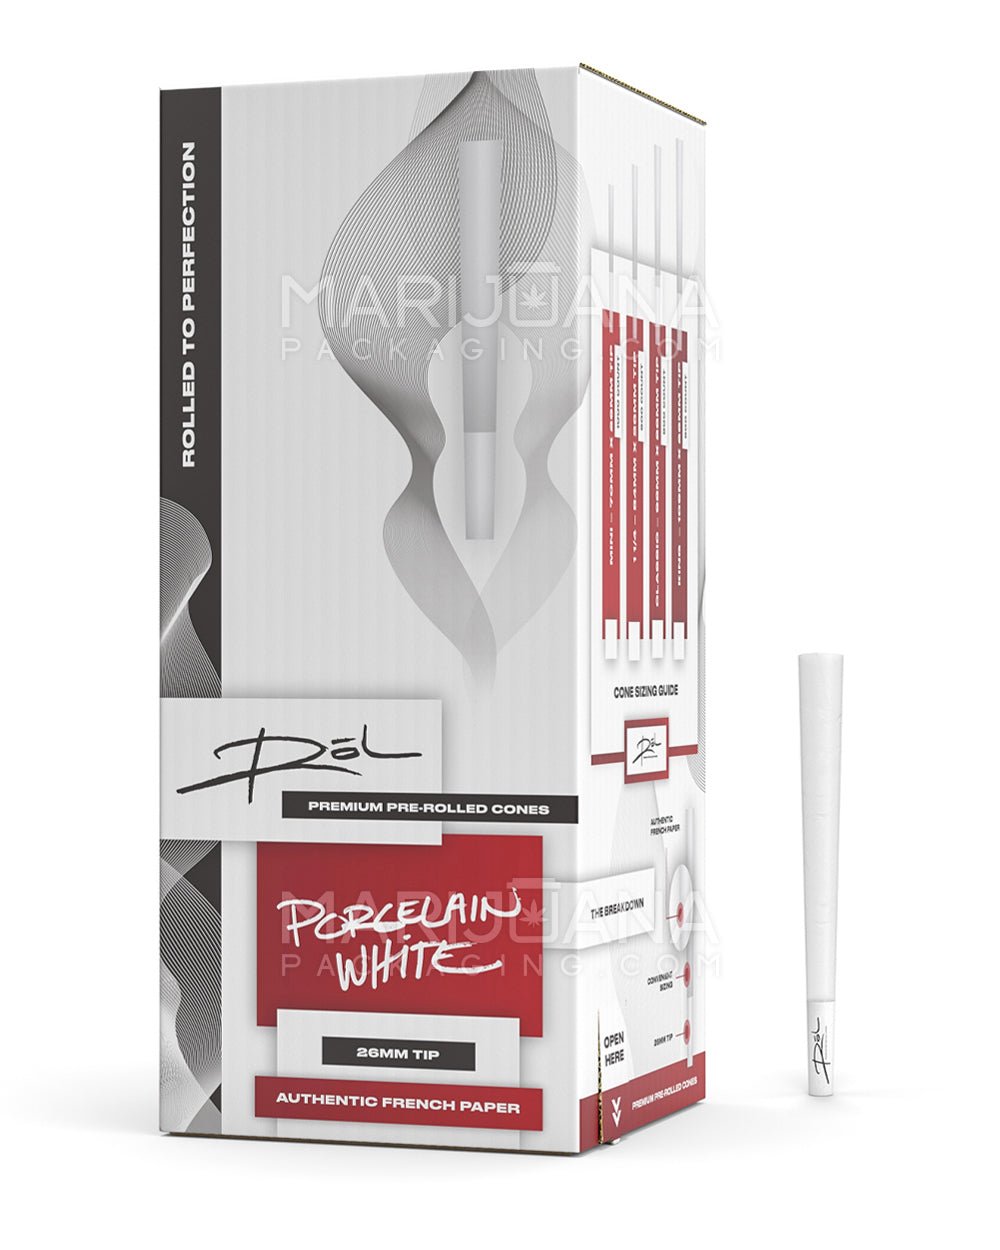 RōL | 98 Special Size Pre-Rolled Cones | 98mm - Porcelain White Paper - 800 Count - 1